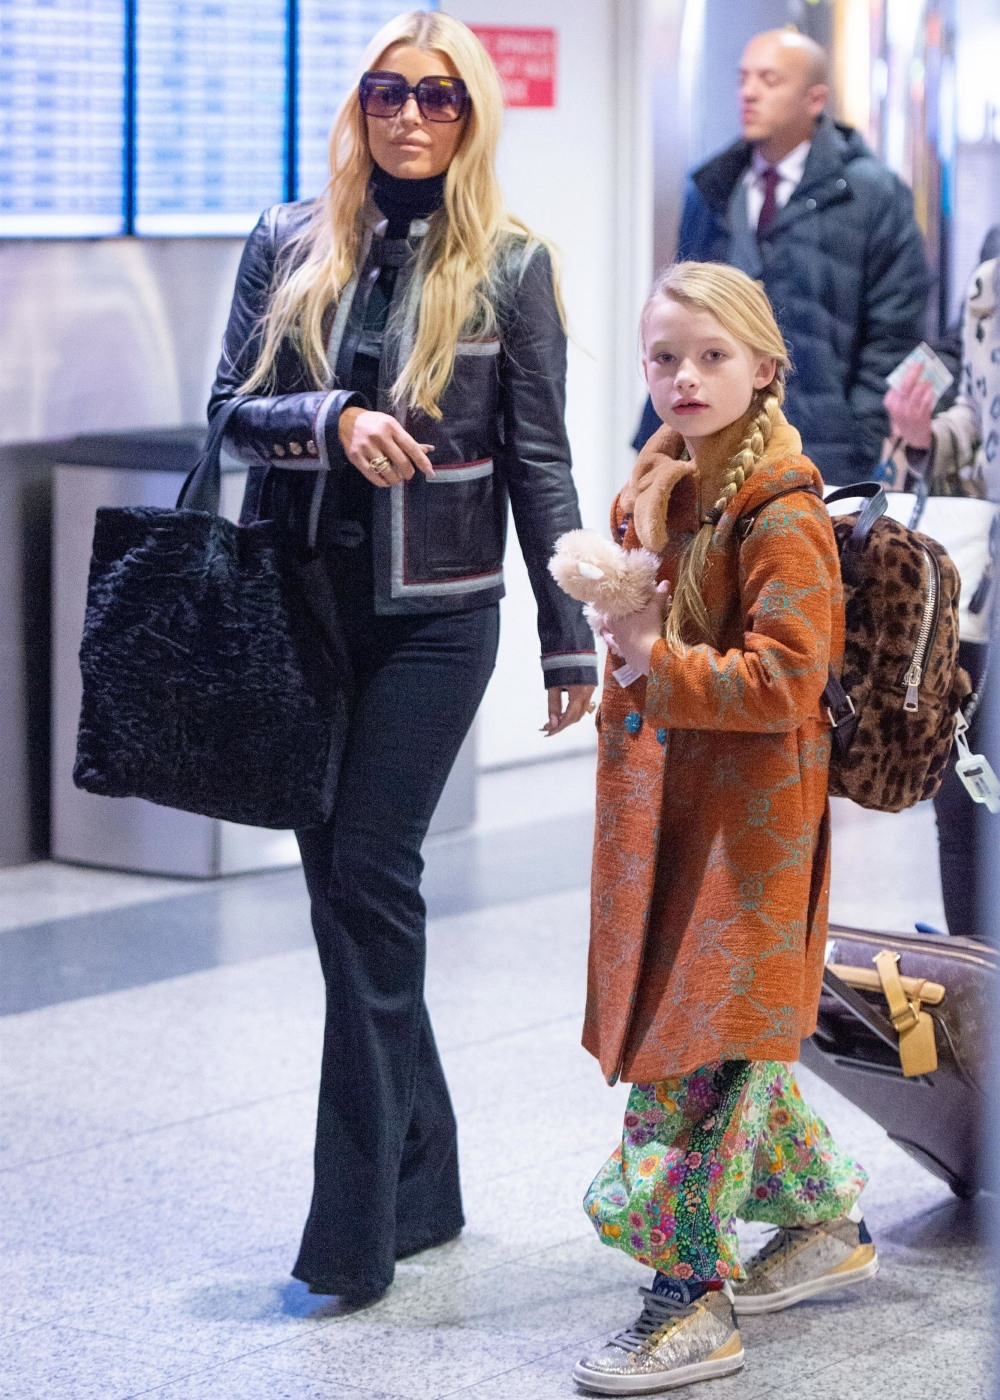 Jessica Simpson with daughter Maxwell and mother get ready to leave NYC